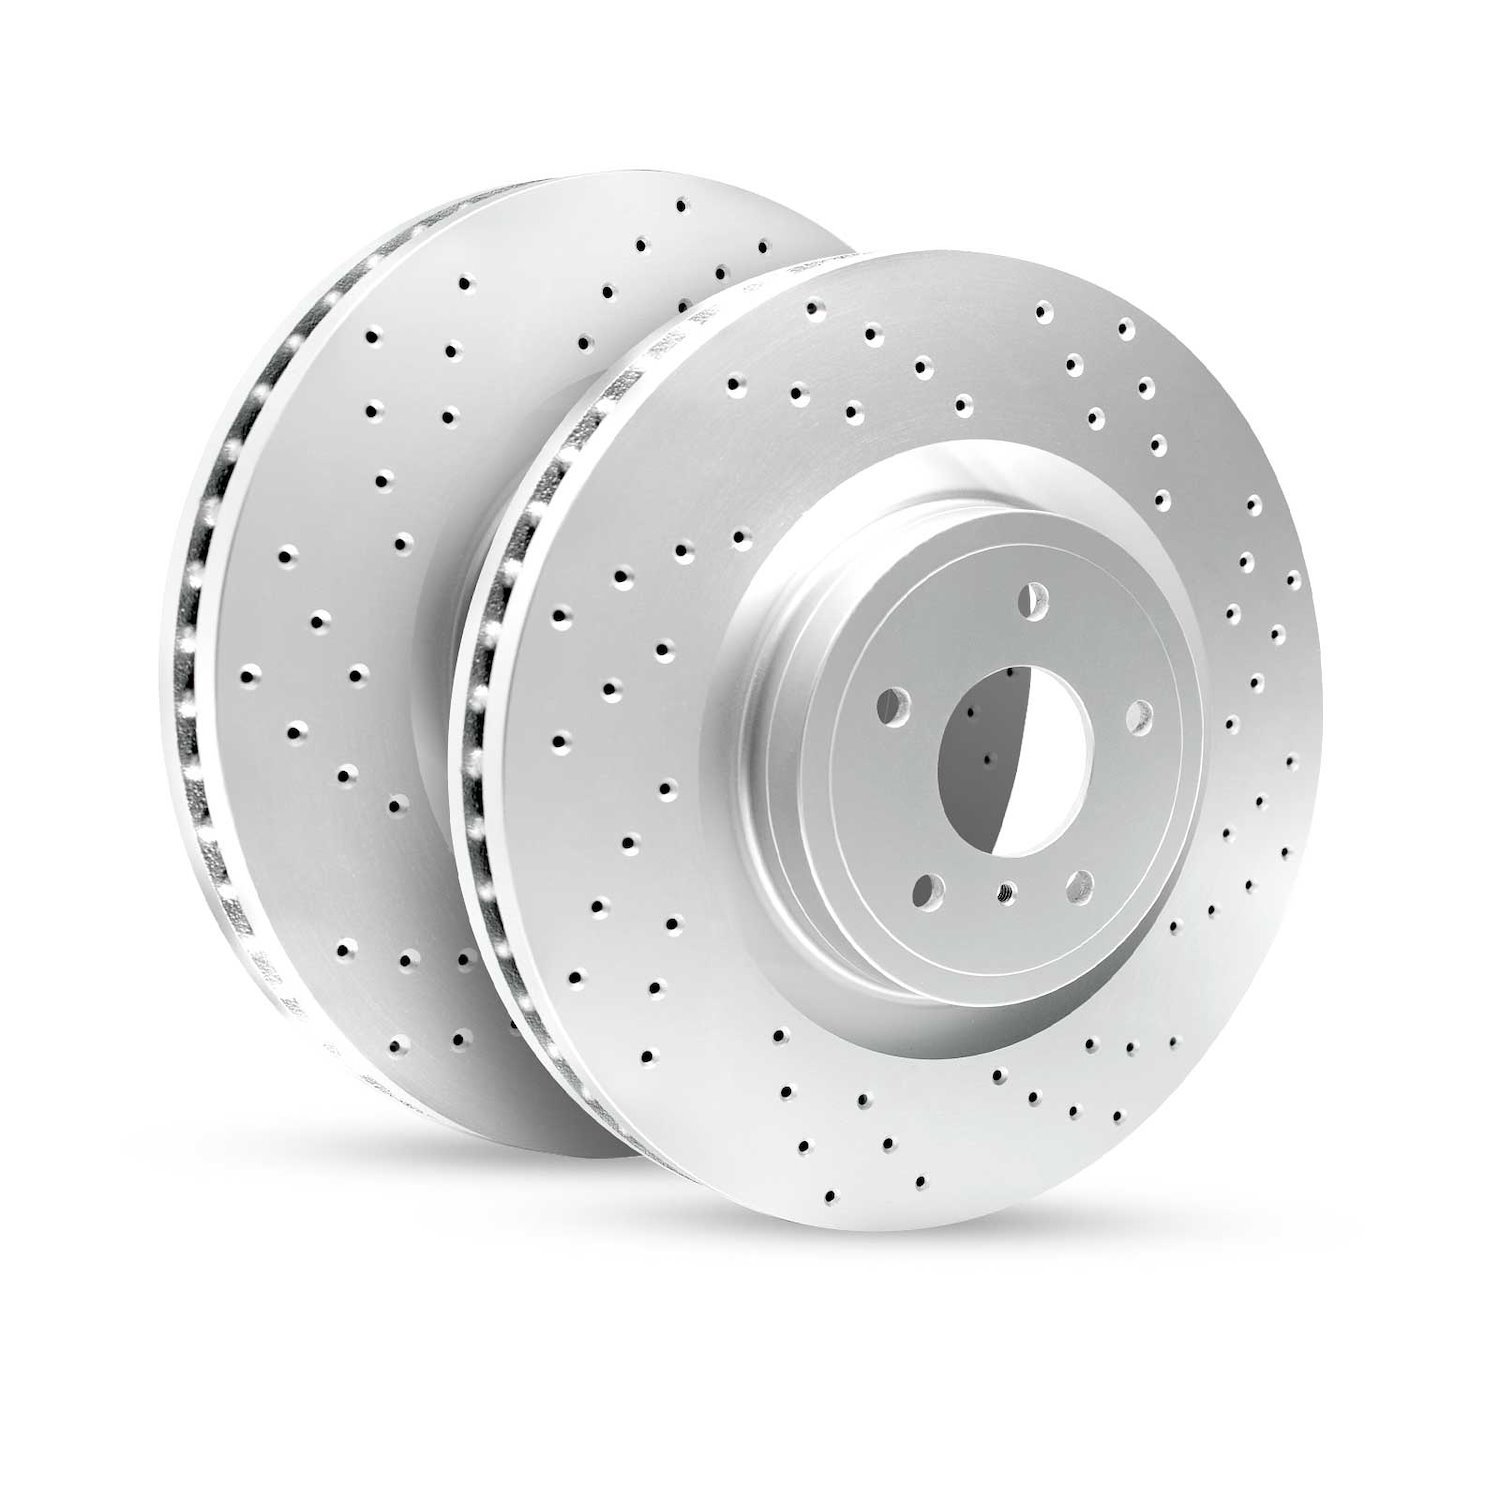 GEO-Carbon Drilled/Slotted Rotors, 2005-2020 Fits Multiple Makes/Models, Position: Rear